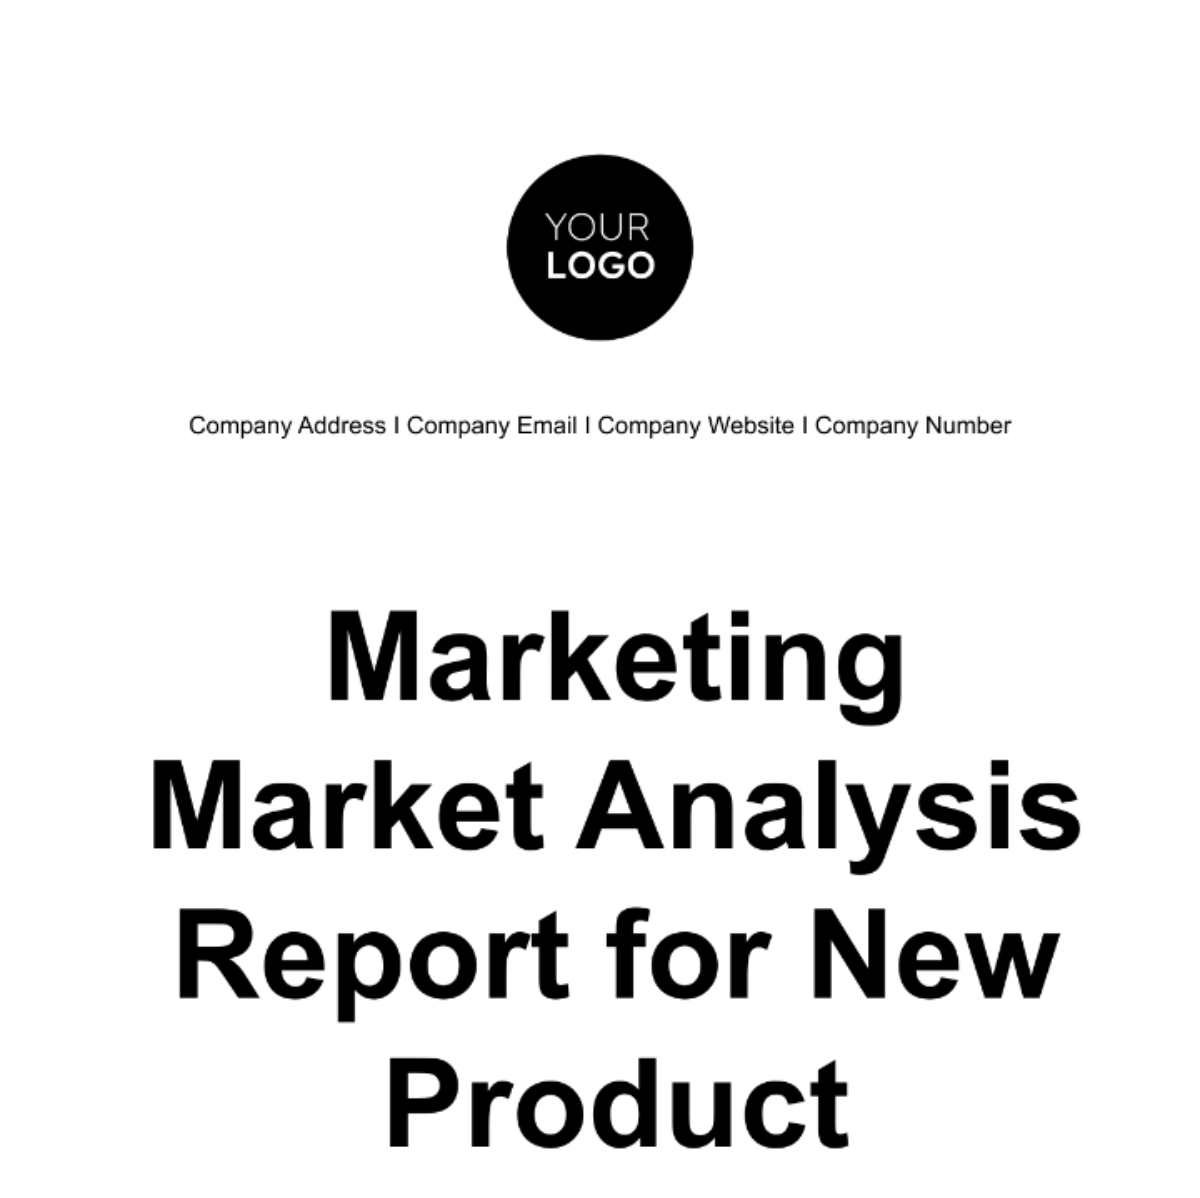 Marketing Market Analysis Report for New Product Template